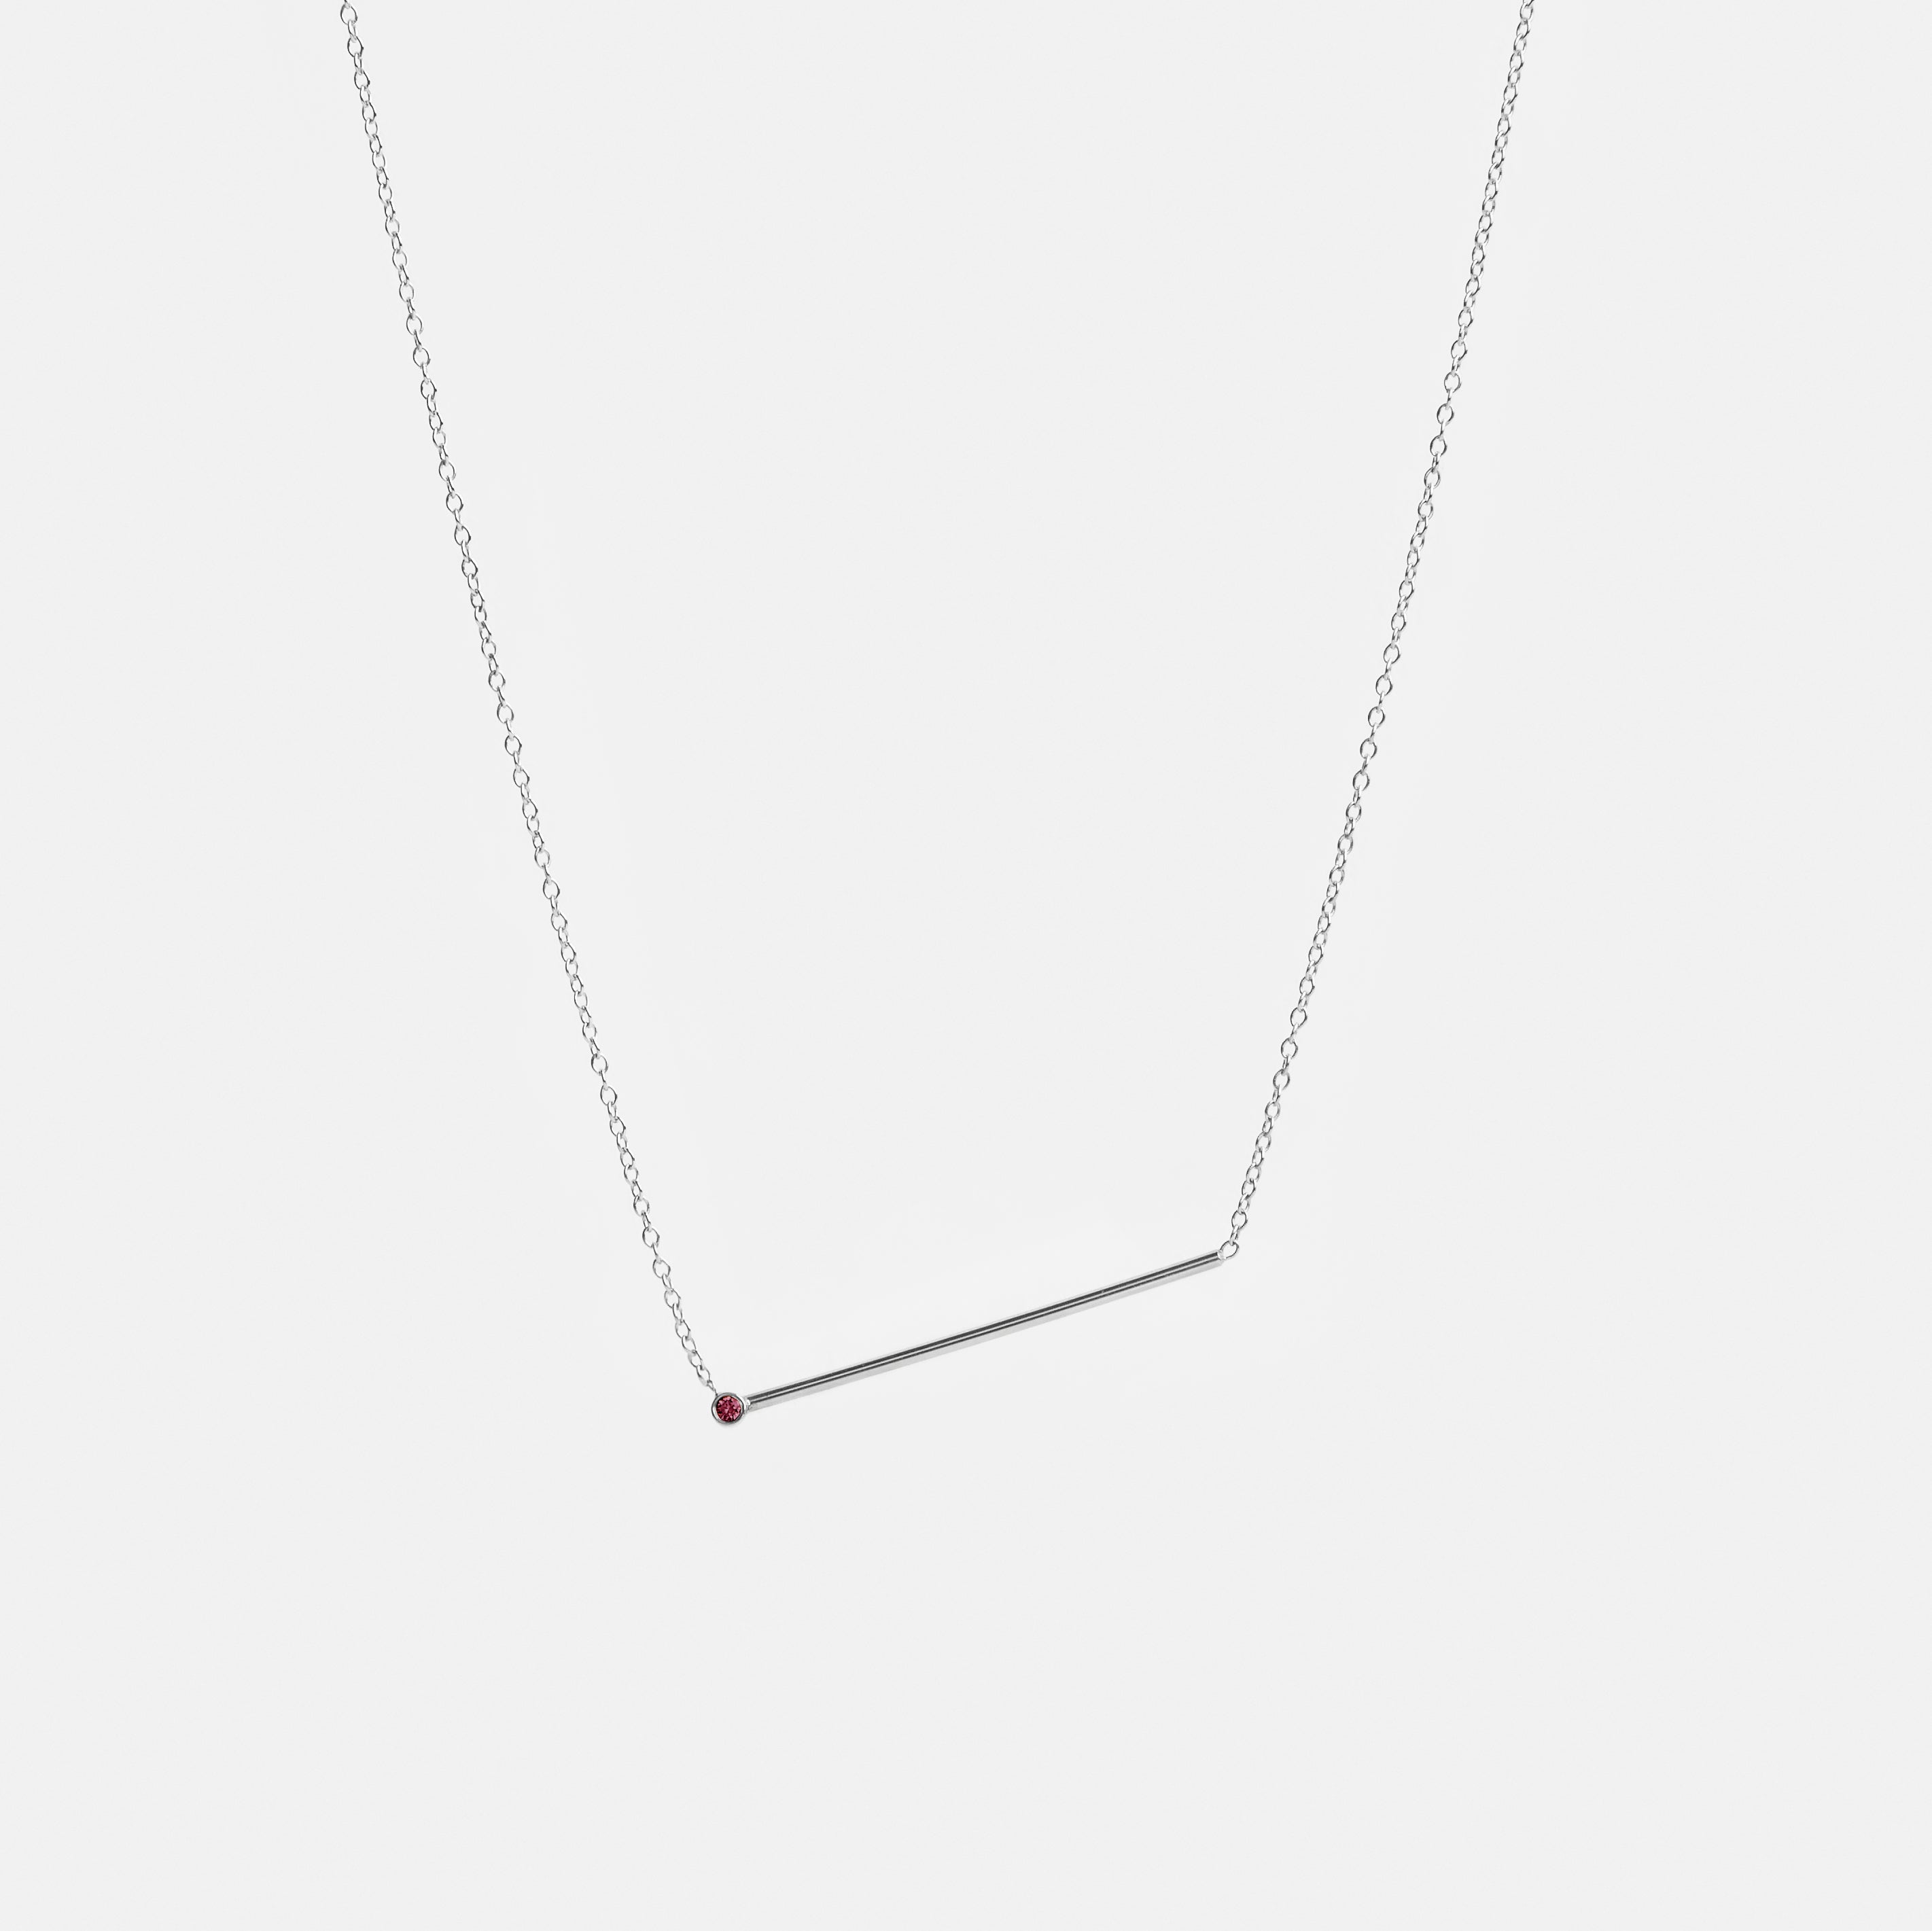 Enne Unusual Necklace in 14k White Gold set with Ruby By SHW Fine Jewelry New York City